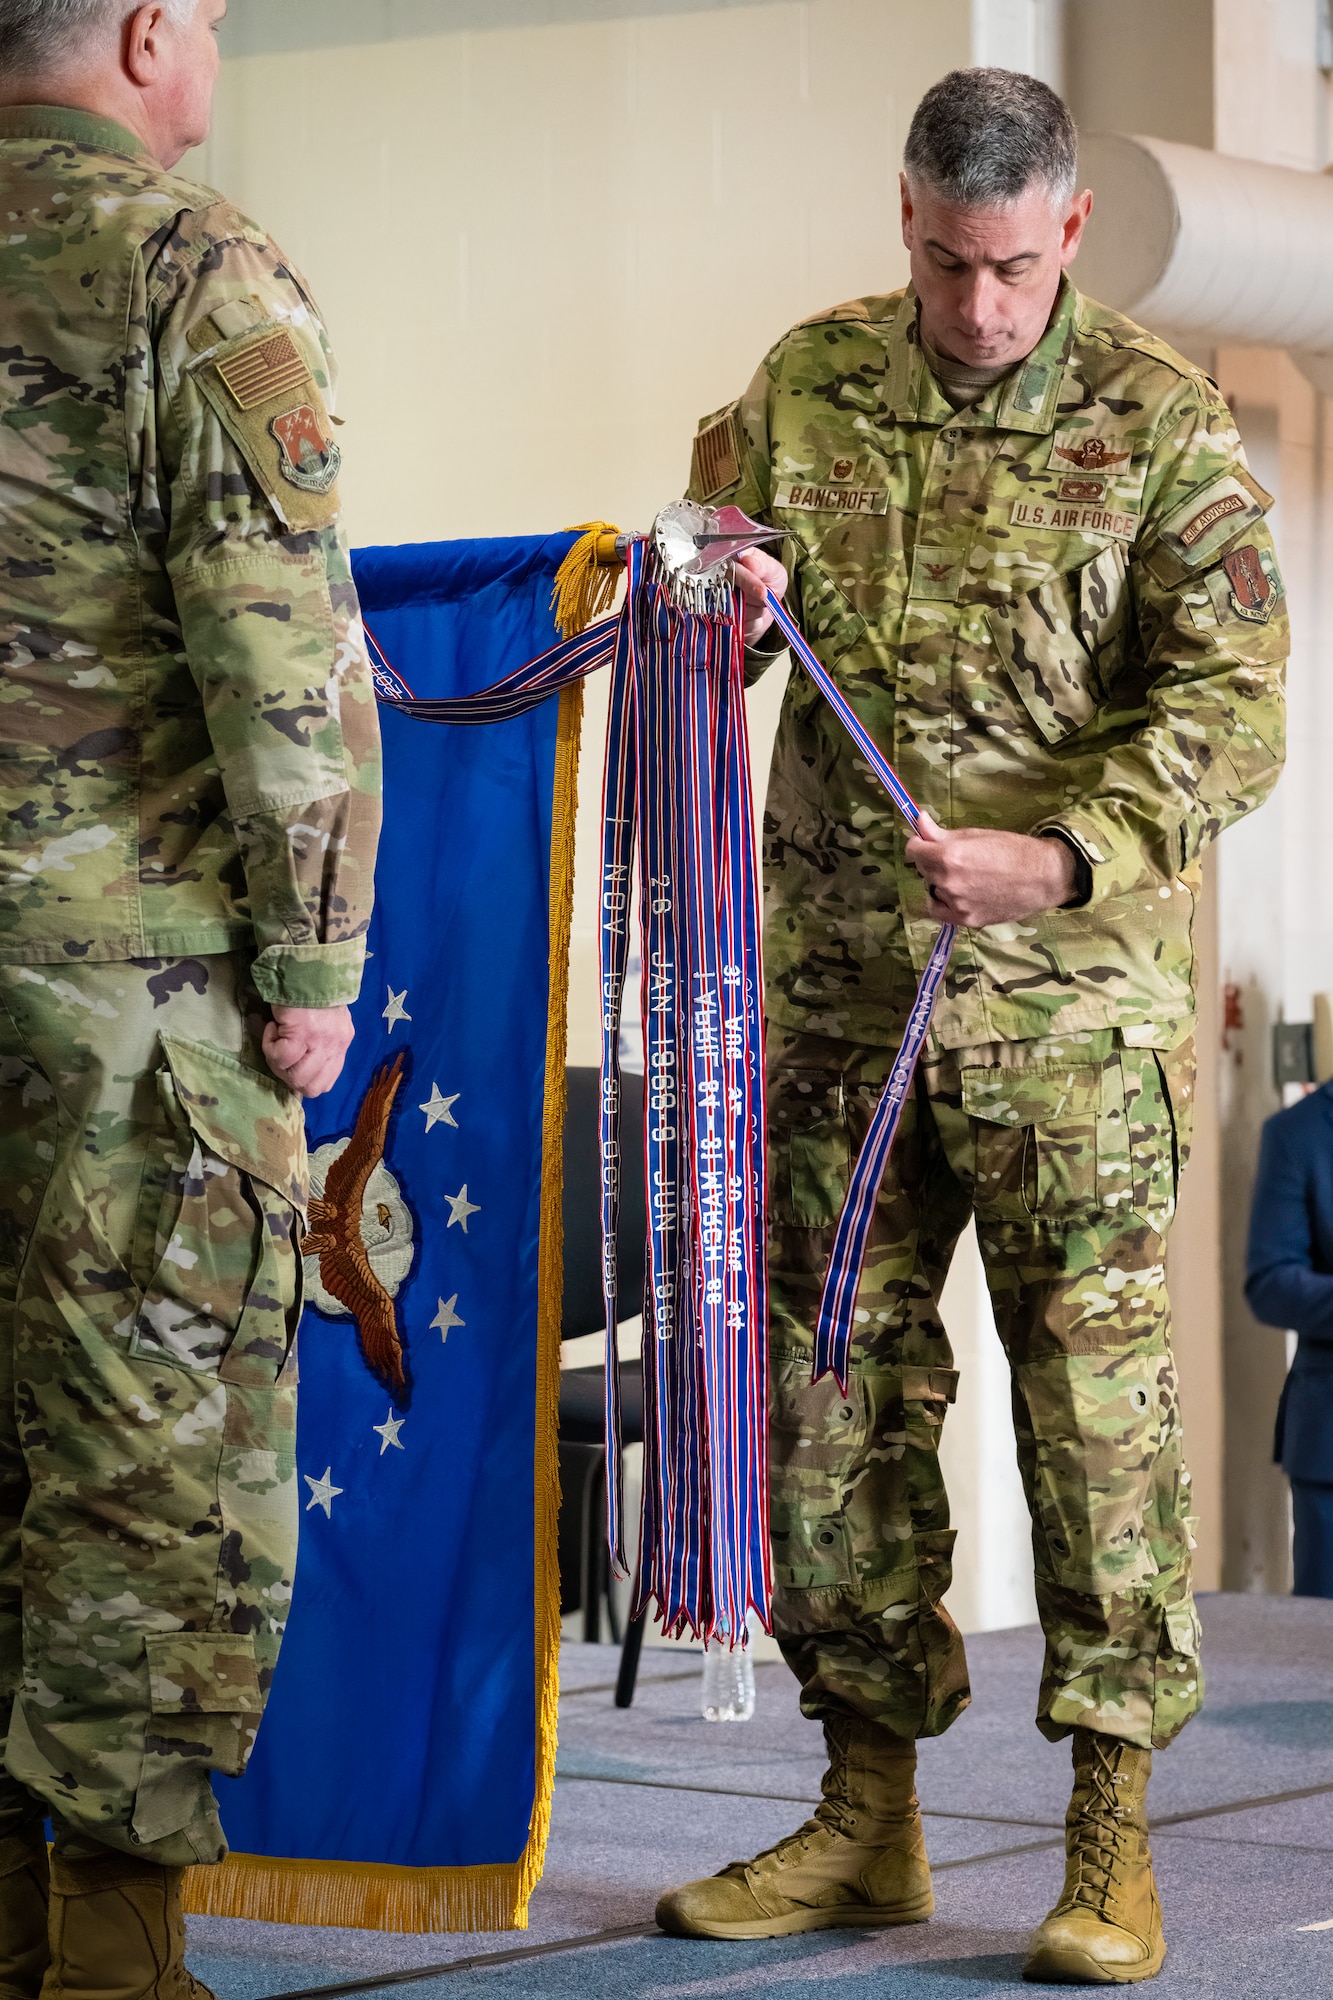 Col. Bruce Bancroft, commander of the 123rd Airlift Wing, attaches a streamer to the unit colors representing its 20th Air Force Outstanding Unit Award during a ceremony at the Kentucky Air National Guard Base in Louisville, Ky., Oct. 14, 2023. The honor recognizes superior achievement in a broad spectrum of missions around the world since 2019. (U.S. Air National Guard photo by Dale Greer)